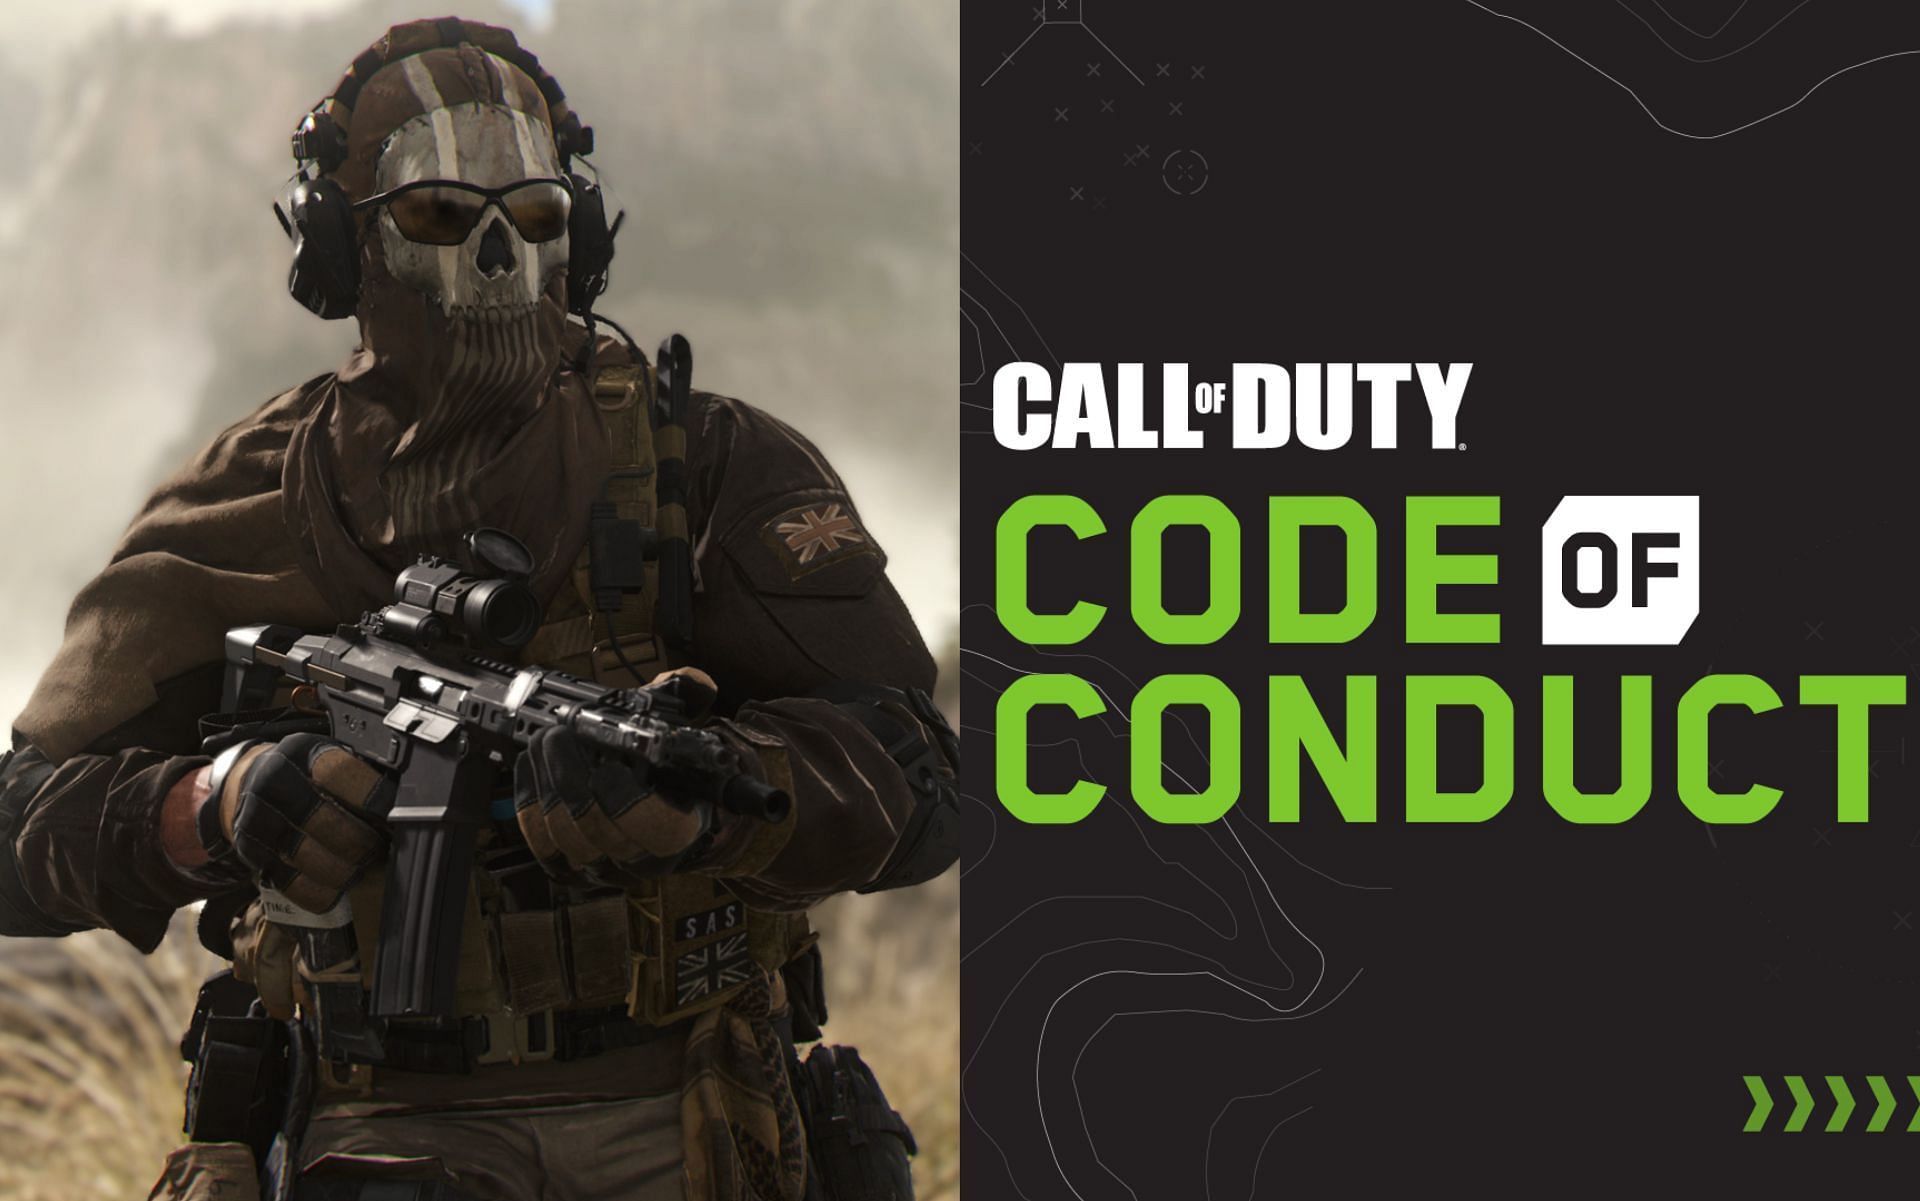 Call of Duty adds new Code of Conduct before Modern Warfare 2 release (Image via Activision)